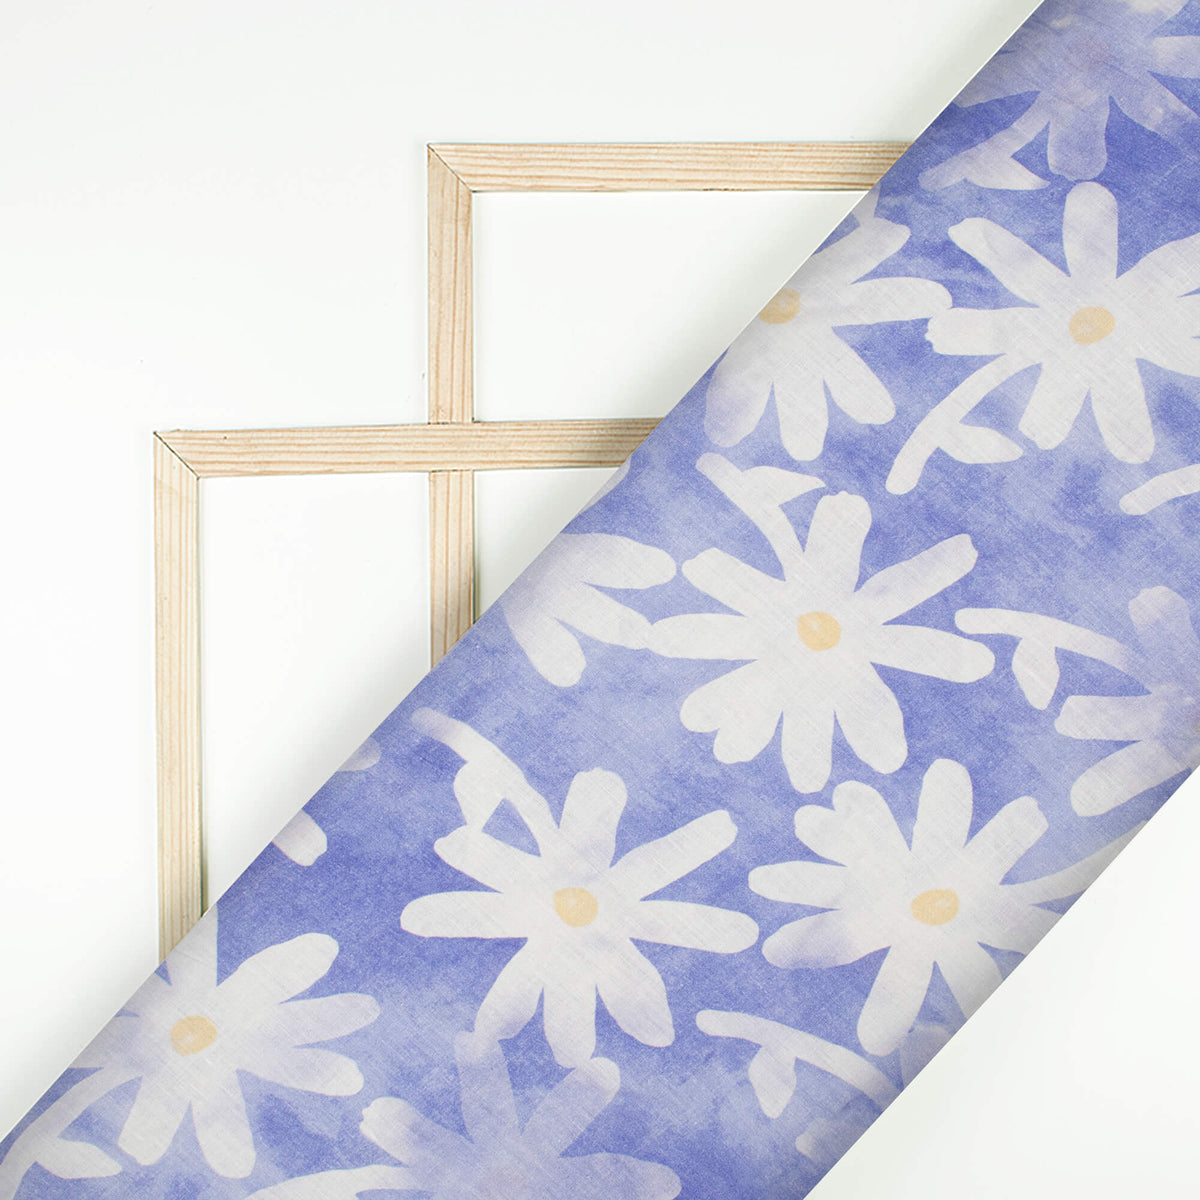 Periwinkle Purple And White Floral Digital Print Swiss Linen Fabric